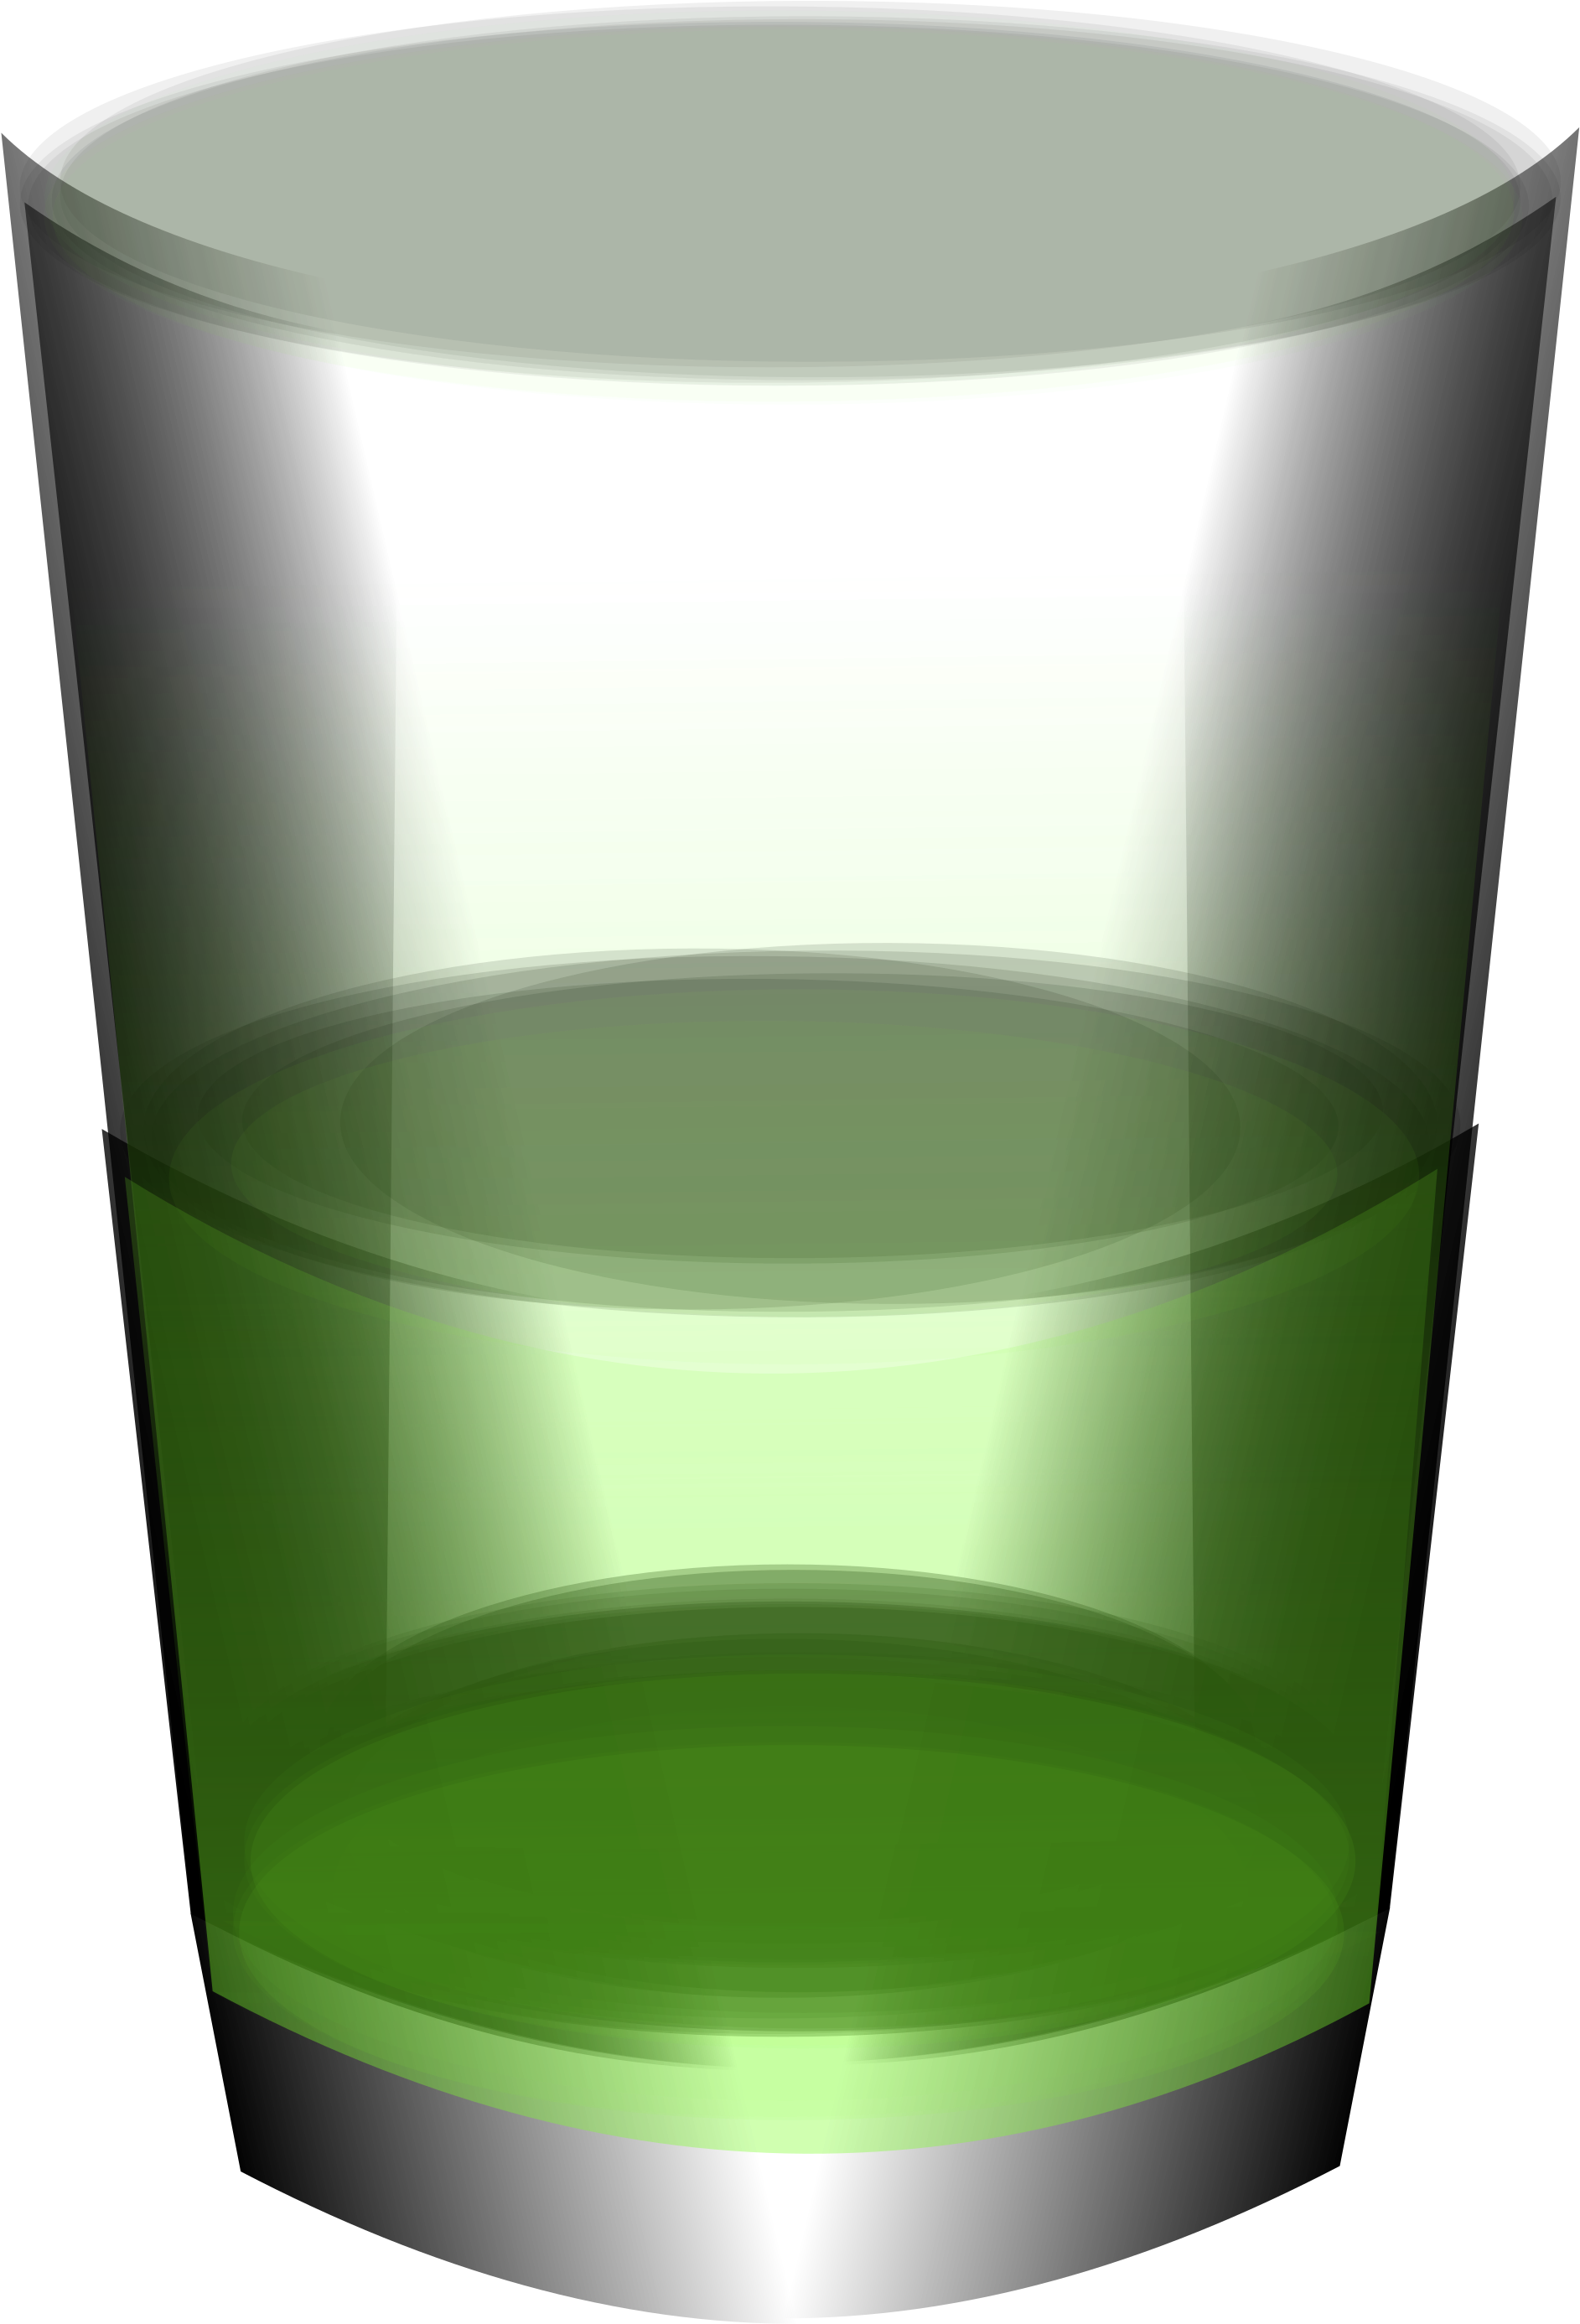 Big Image - Green Water In A Glass (2400x3394)